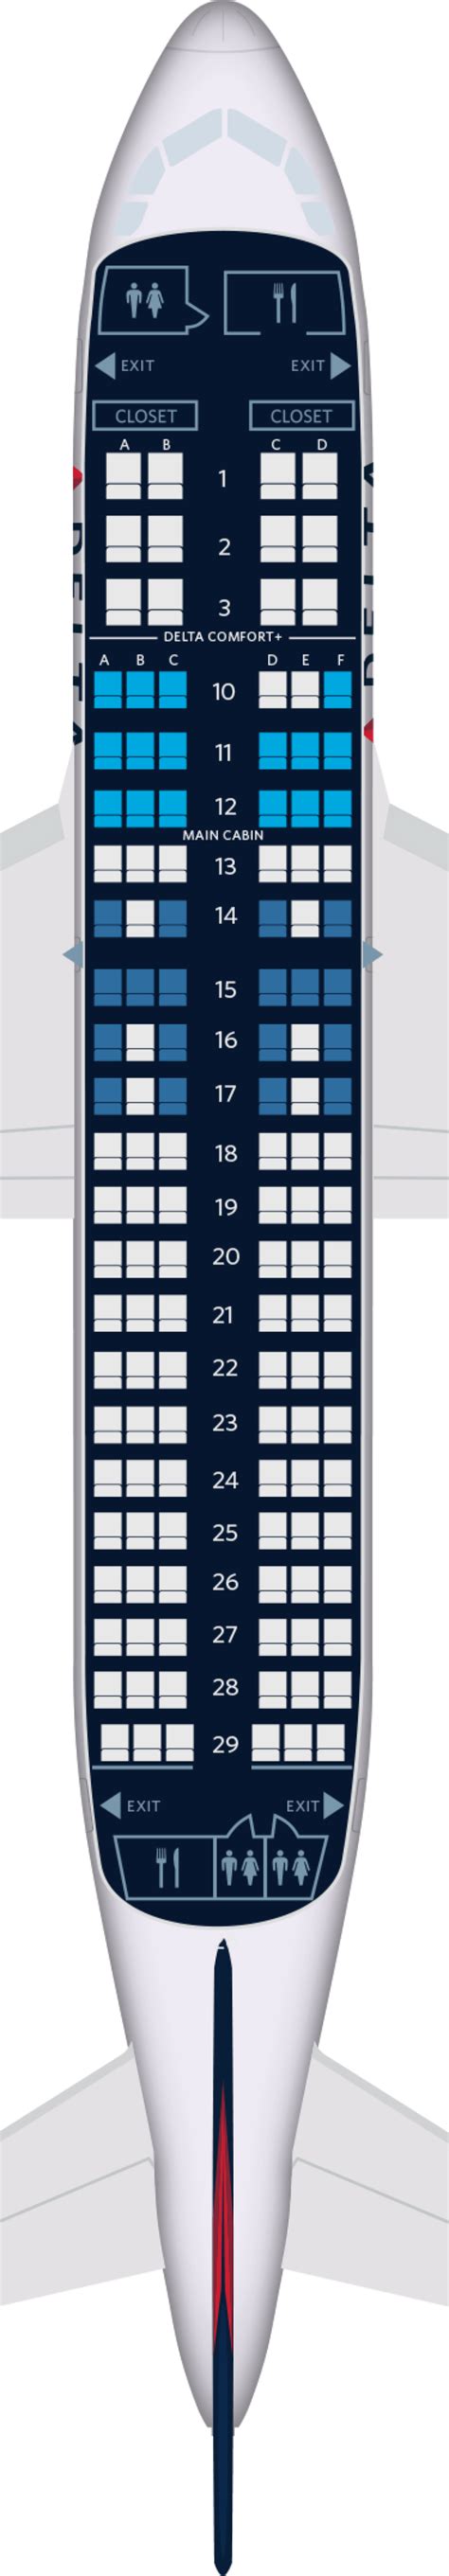 Airbus A319 100 Seat Maps Specs And Amenities Delta Air Lines